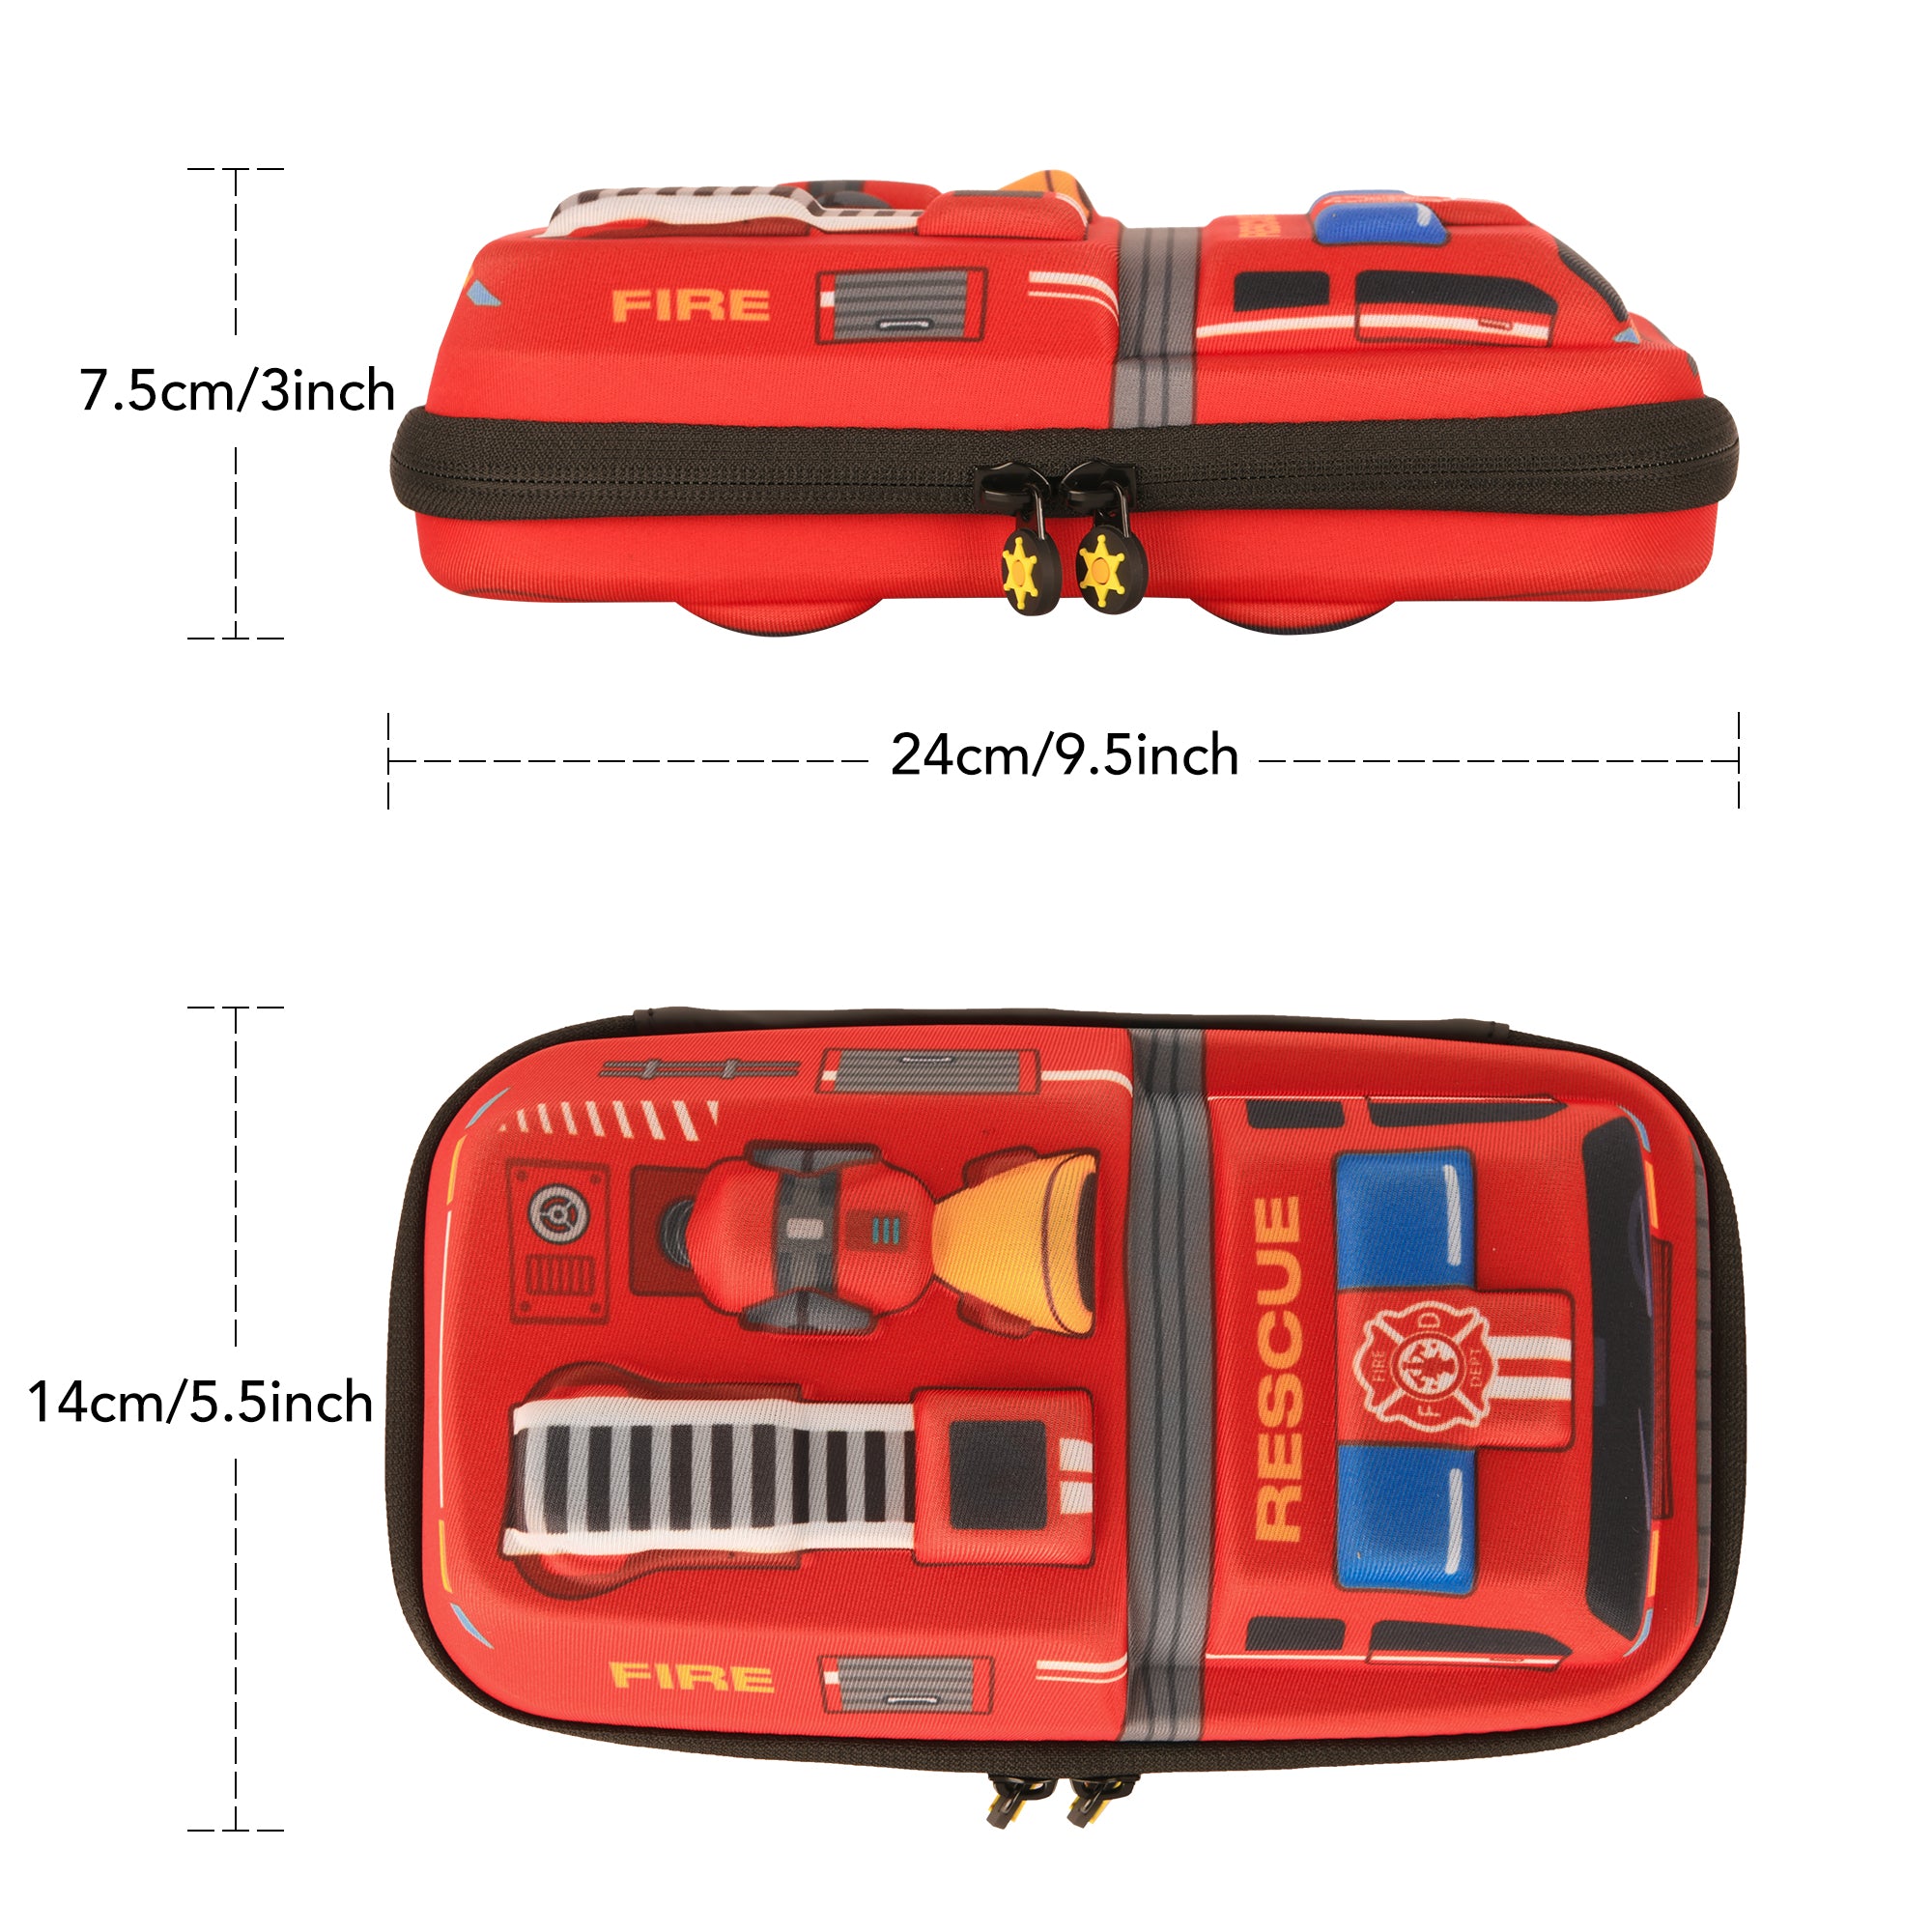 Rockpapa Fire Truck Large Pencil Cases, Big Pencil Case for Boys & Girls, Small Storage Box for School Students Boys Teens Kids Toddlers